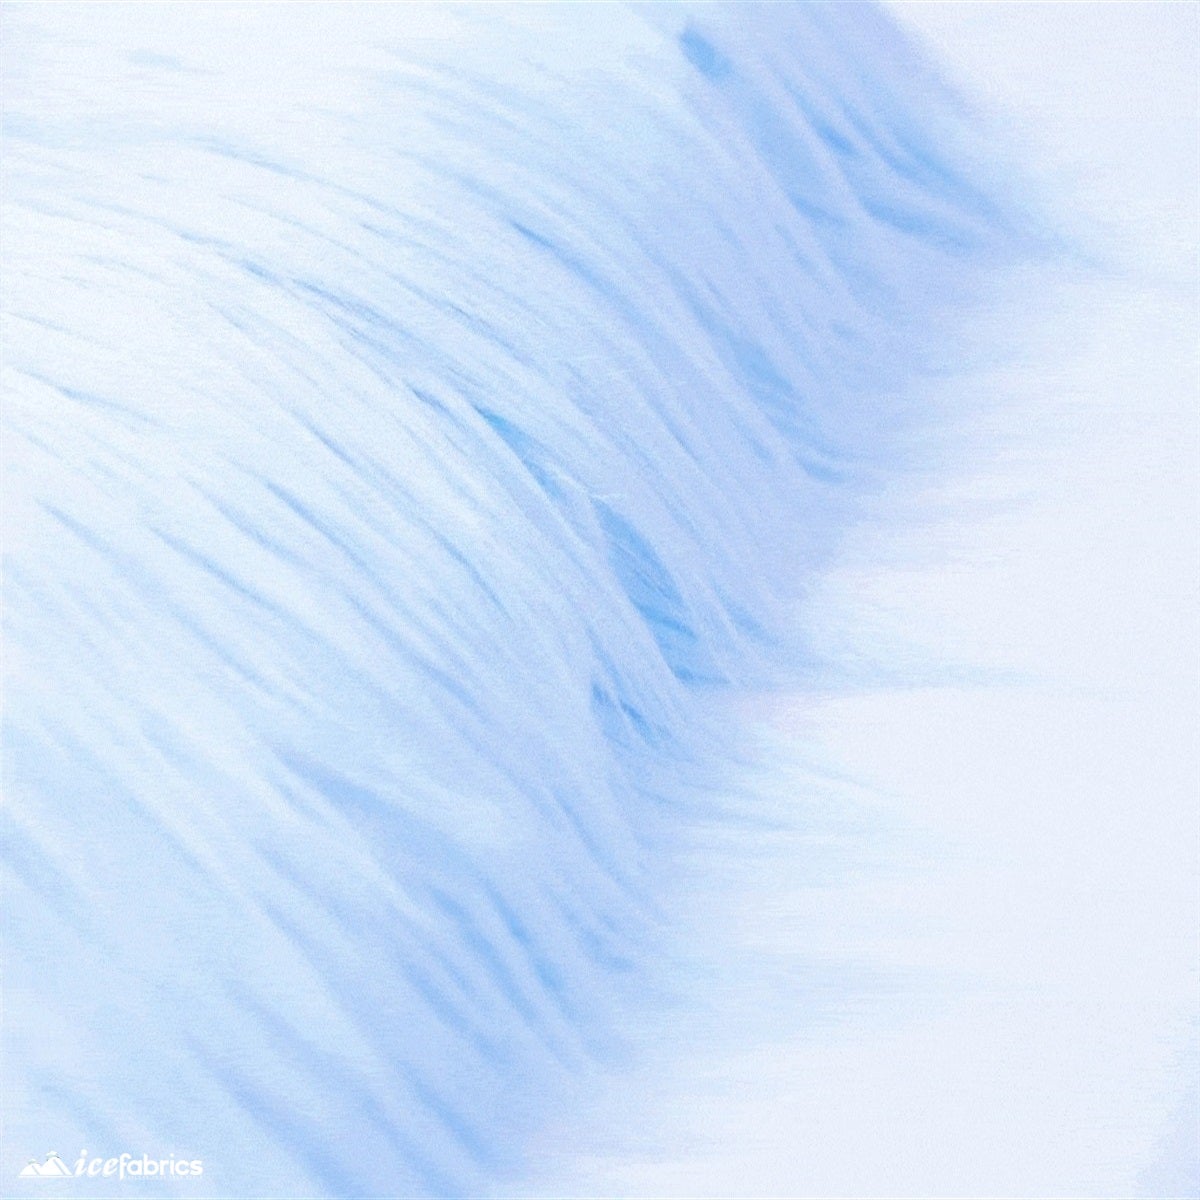 Mohair Faux Fur Fabric By The Roll (20 Yards) 4 Inch PileICE FABRICSICE FABRICSBlueBy The Roll (60" Wide)Mohair Faux Fur Fabric By The Roll (20 Yards) 4 Inch Pile ICE FABRICS